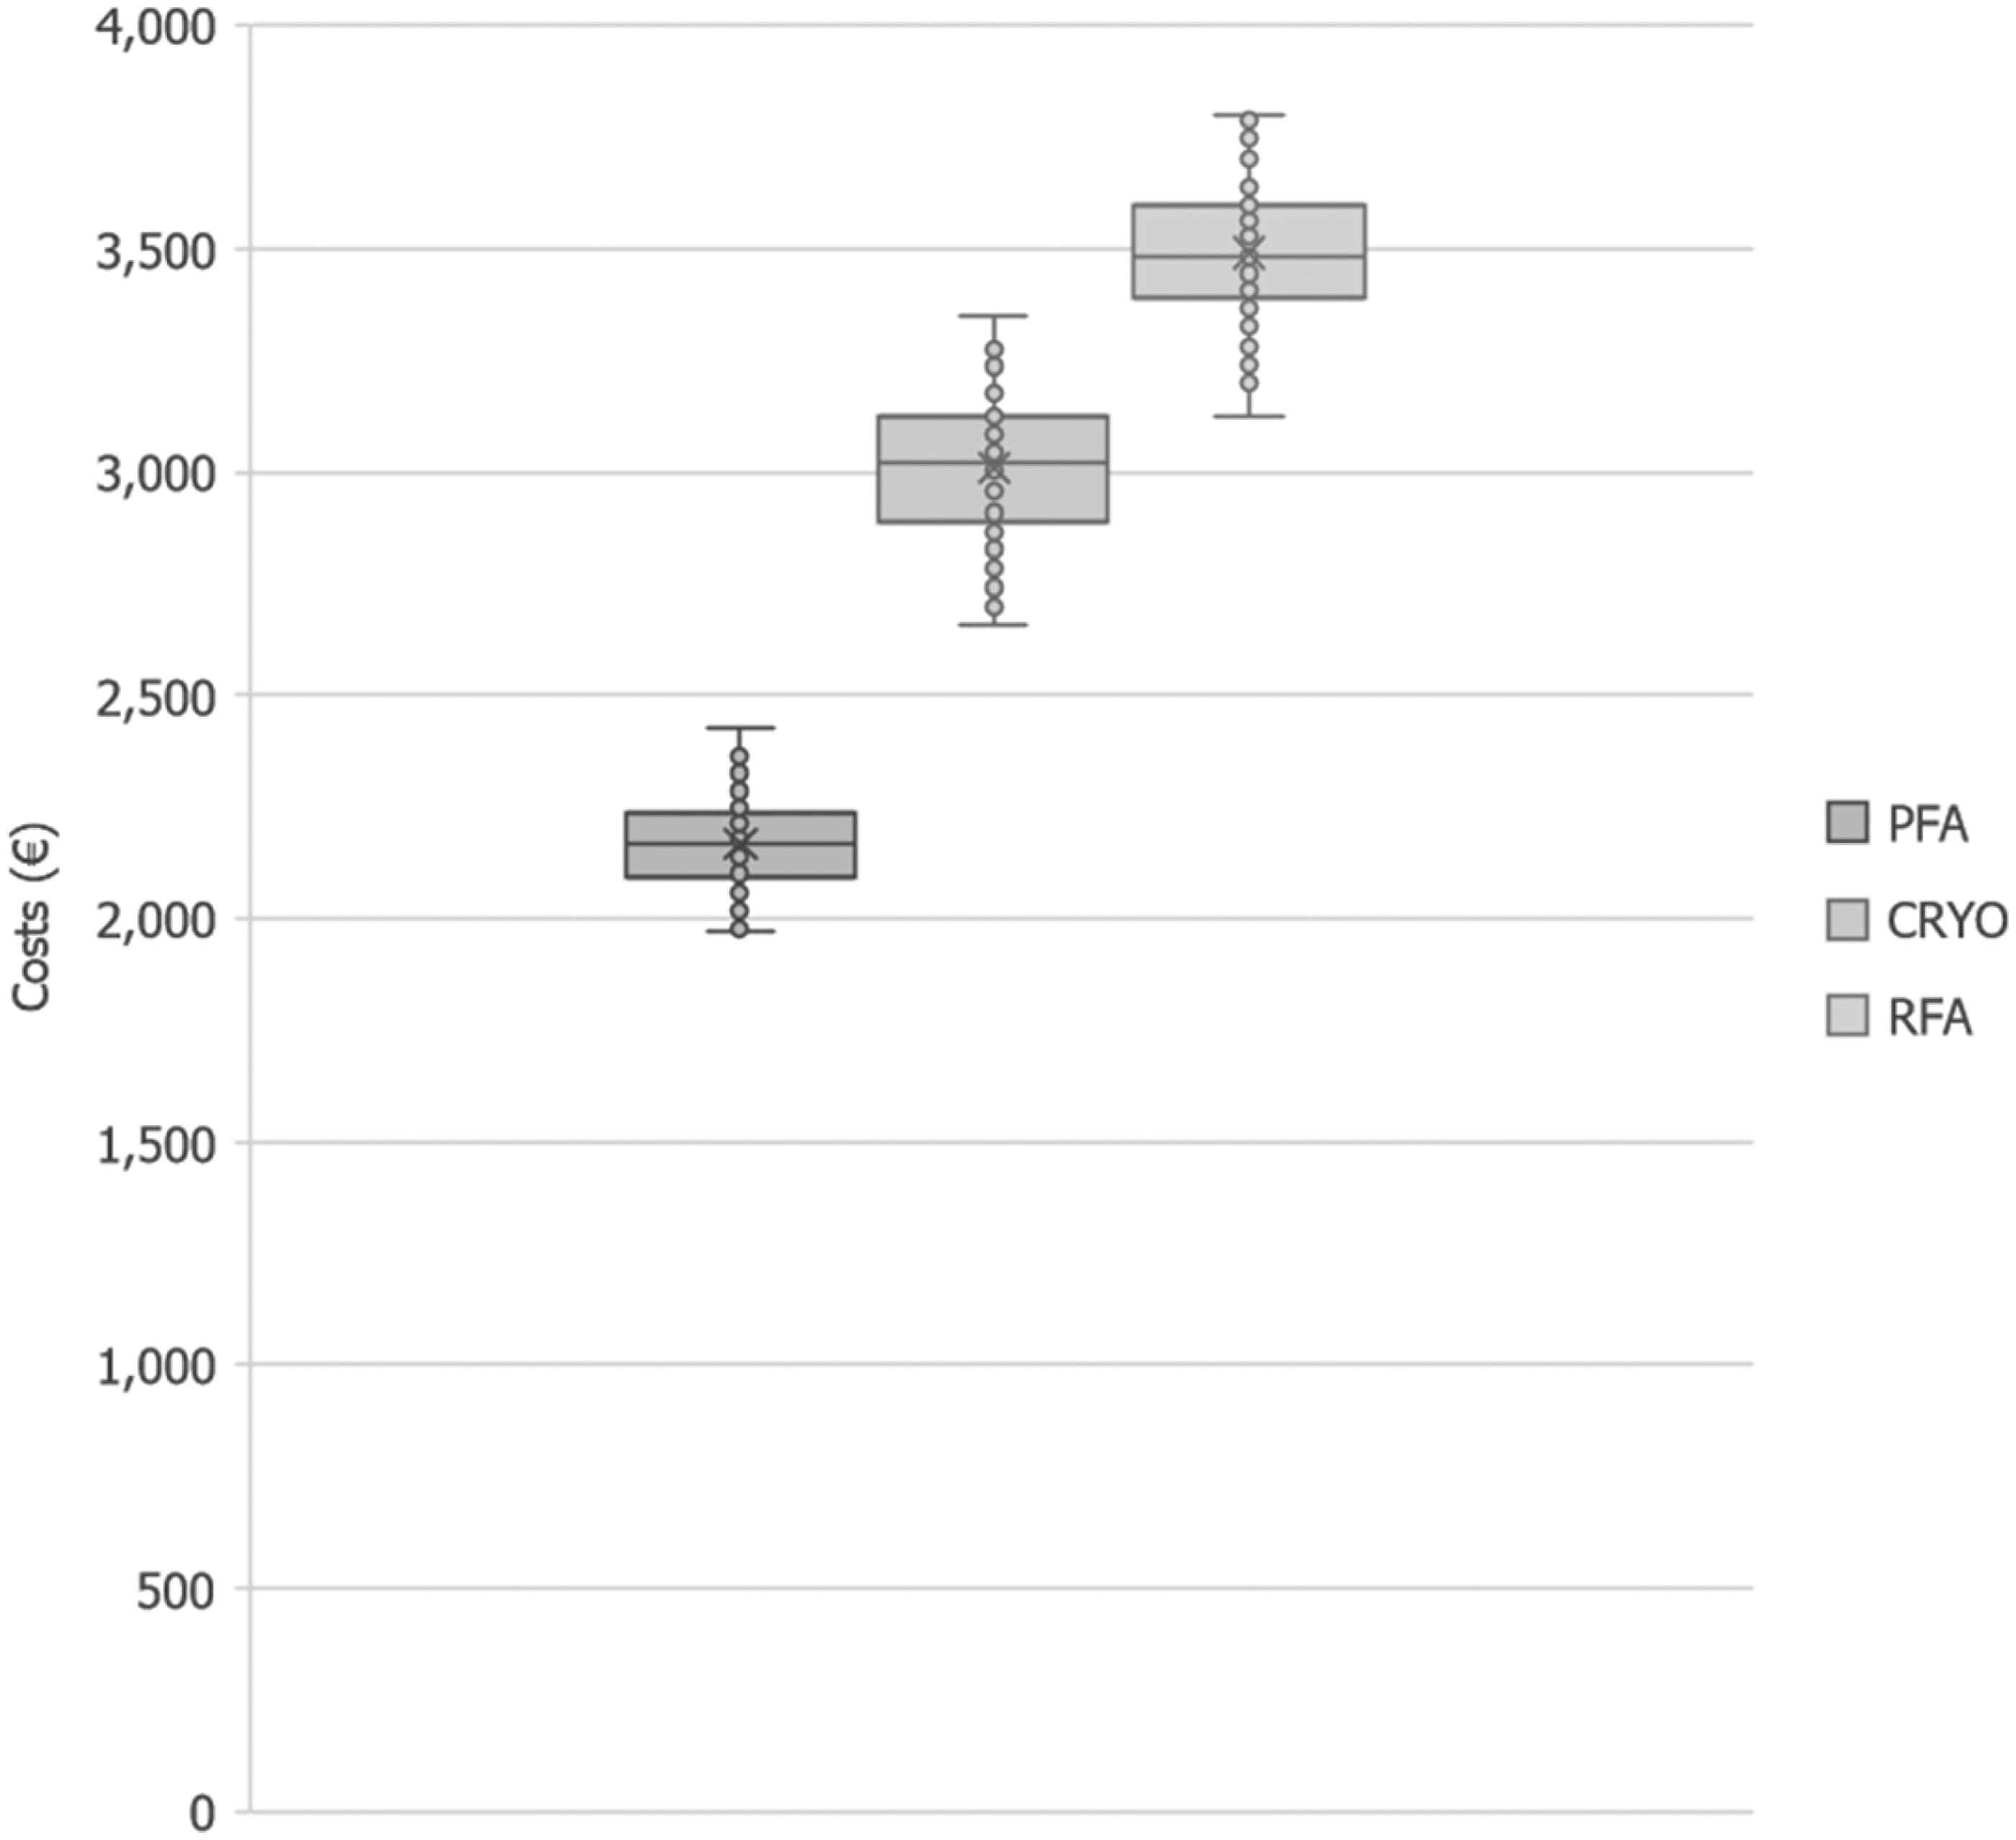 Figure 3. Boxplot of total cost per patient. Each box represents the interquartile range of the total patient cost. The median value is indicated by the line inside each box, with whiskers extending above and below the box. Outliers are shown as individual points